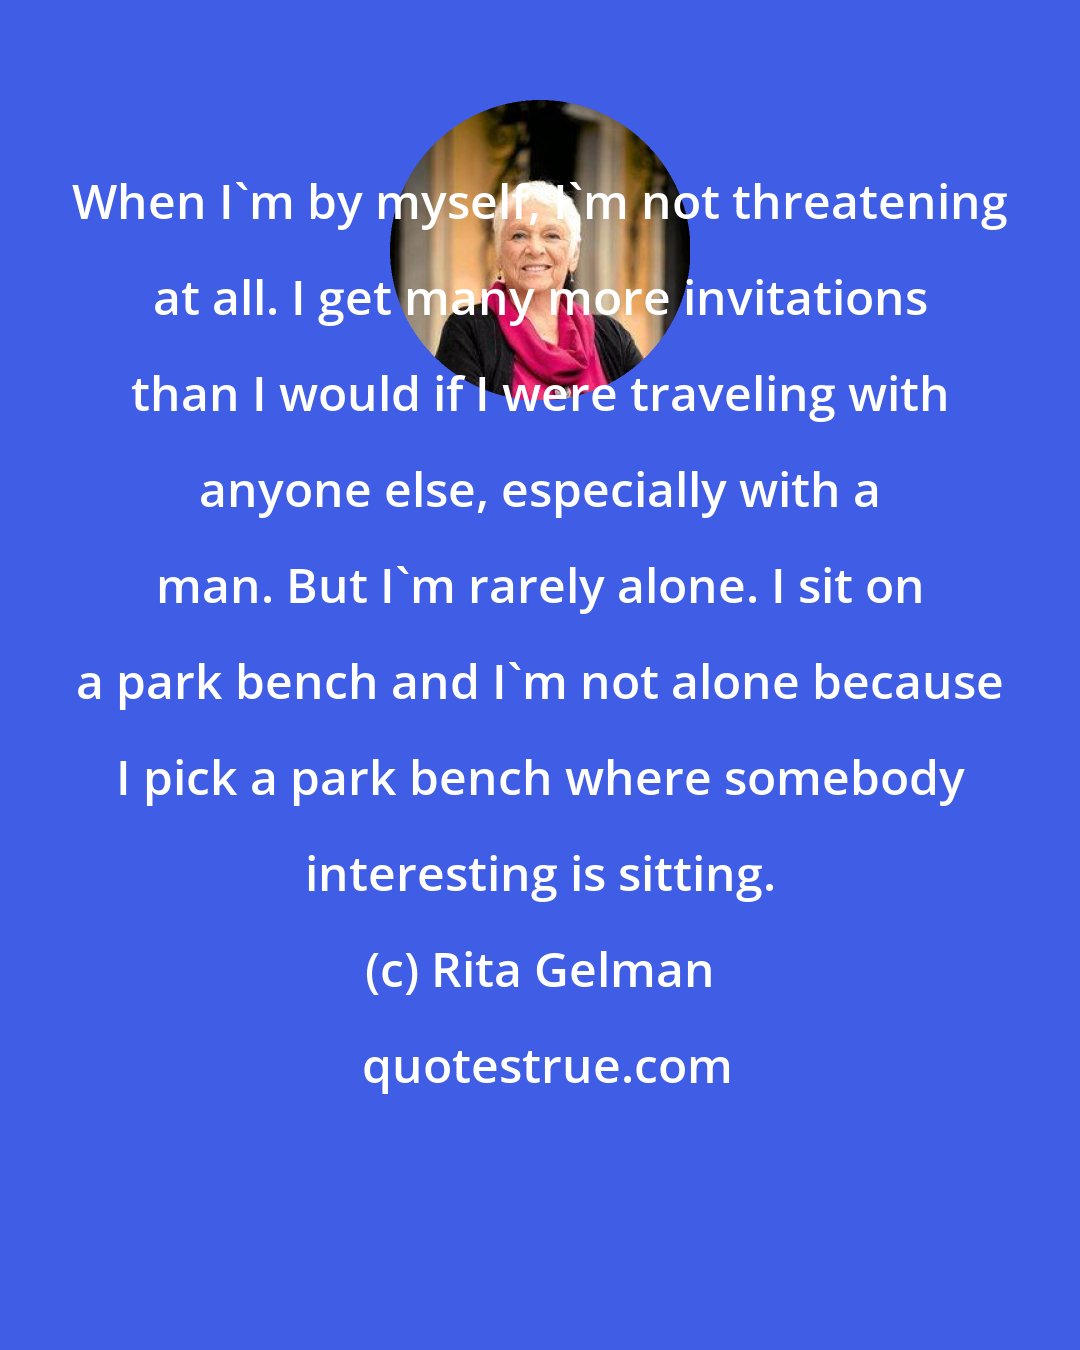 Rita Gelman: When I'm by myself, I'm not threatening at all. I get many more invitations than I would if I were traveling with anyone else, especially with a man. But I'm rarely alone. I sit on a park bench and I'm not alone because I pick a park bench where somebody interesting is sitting.